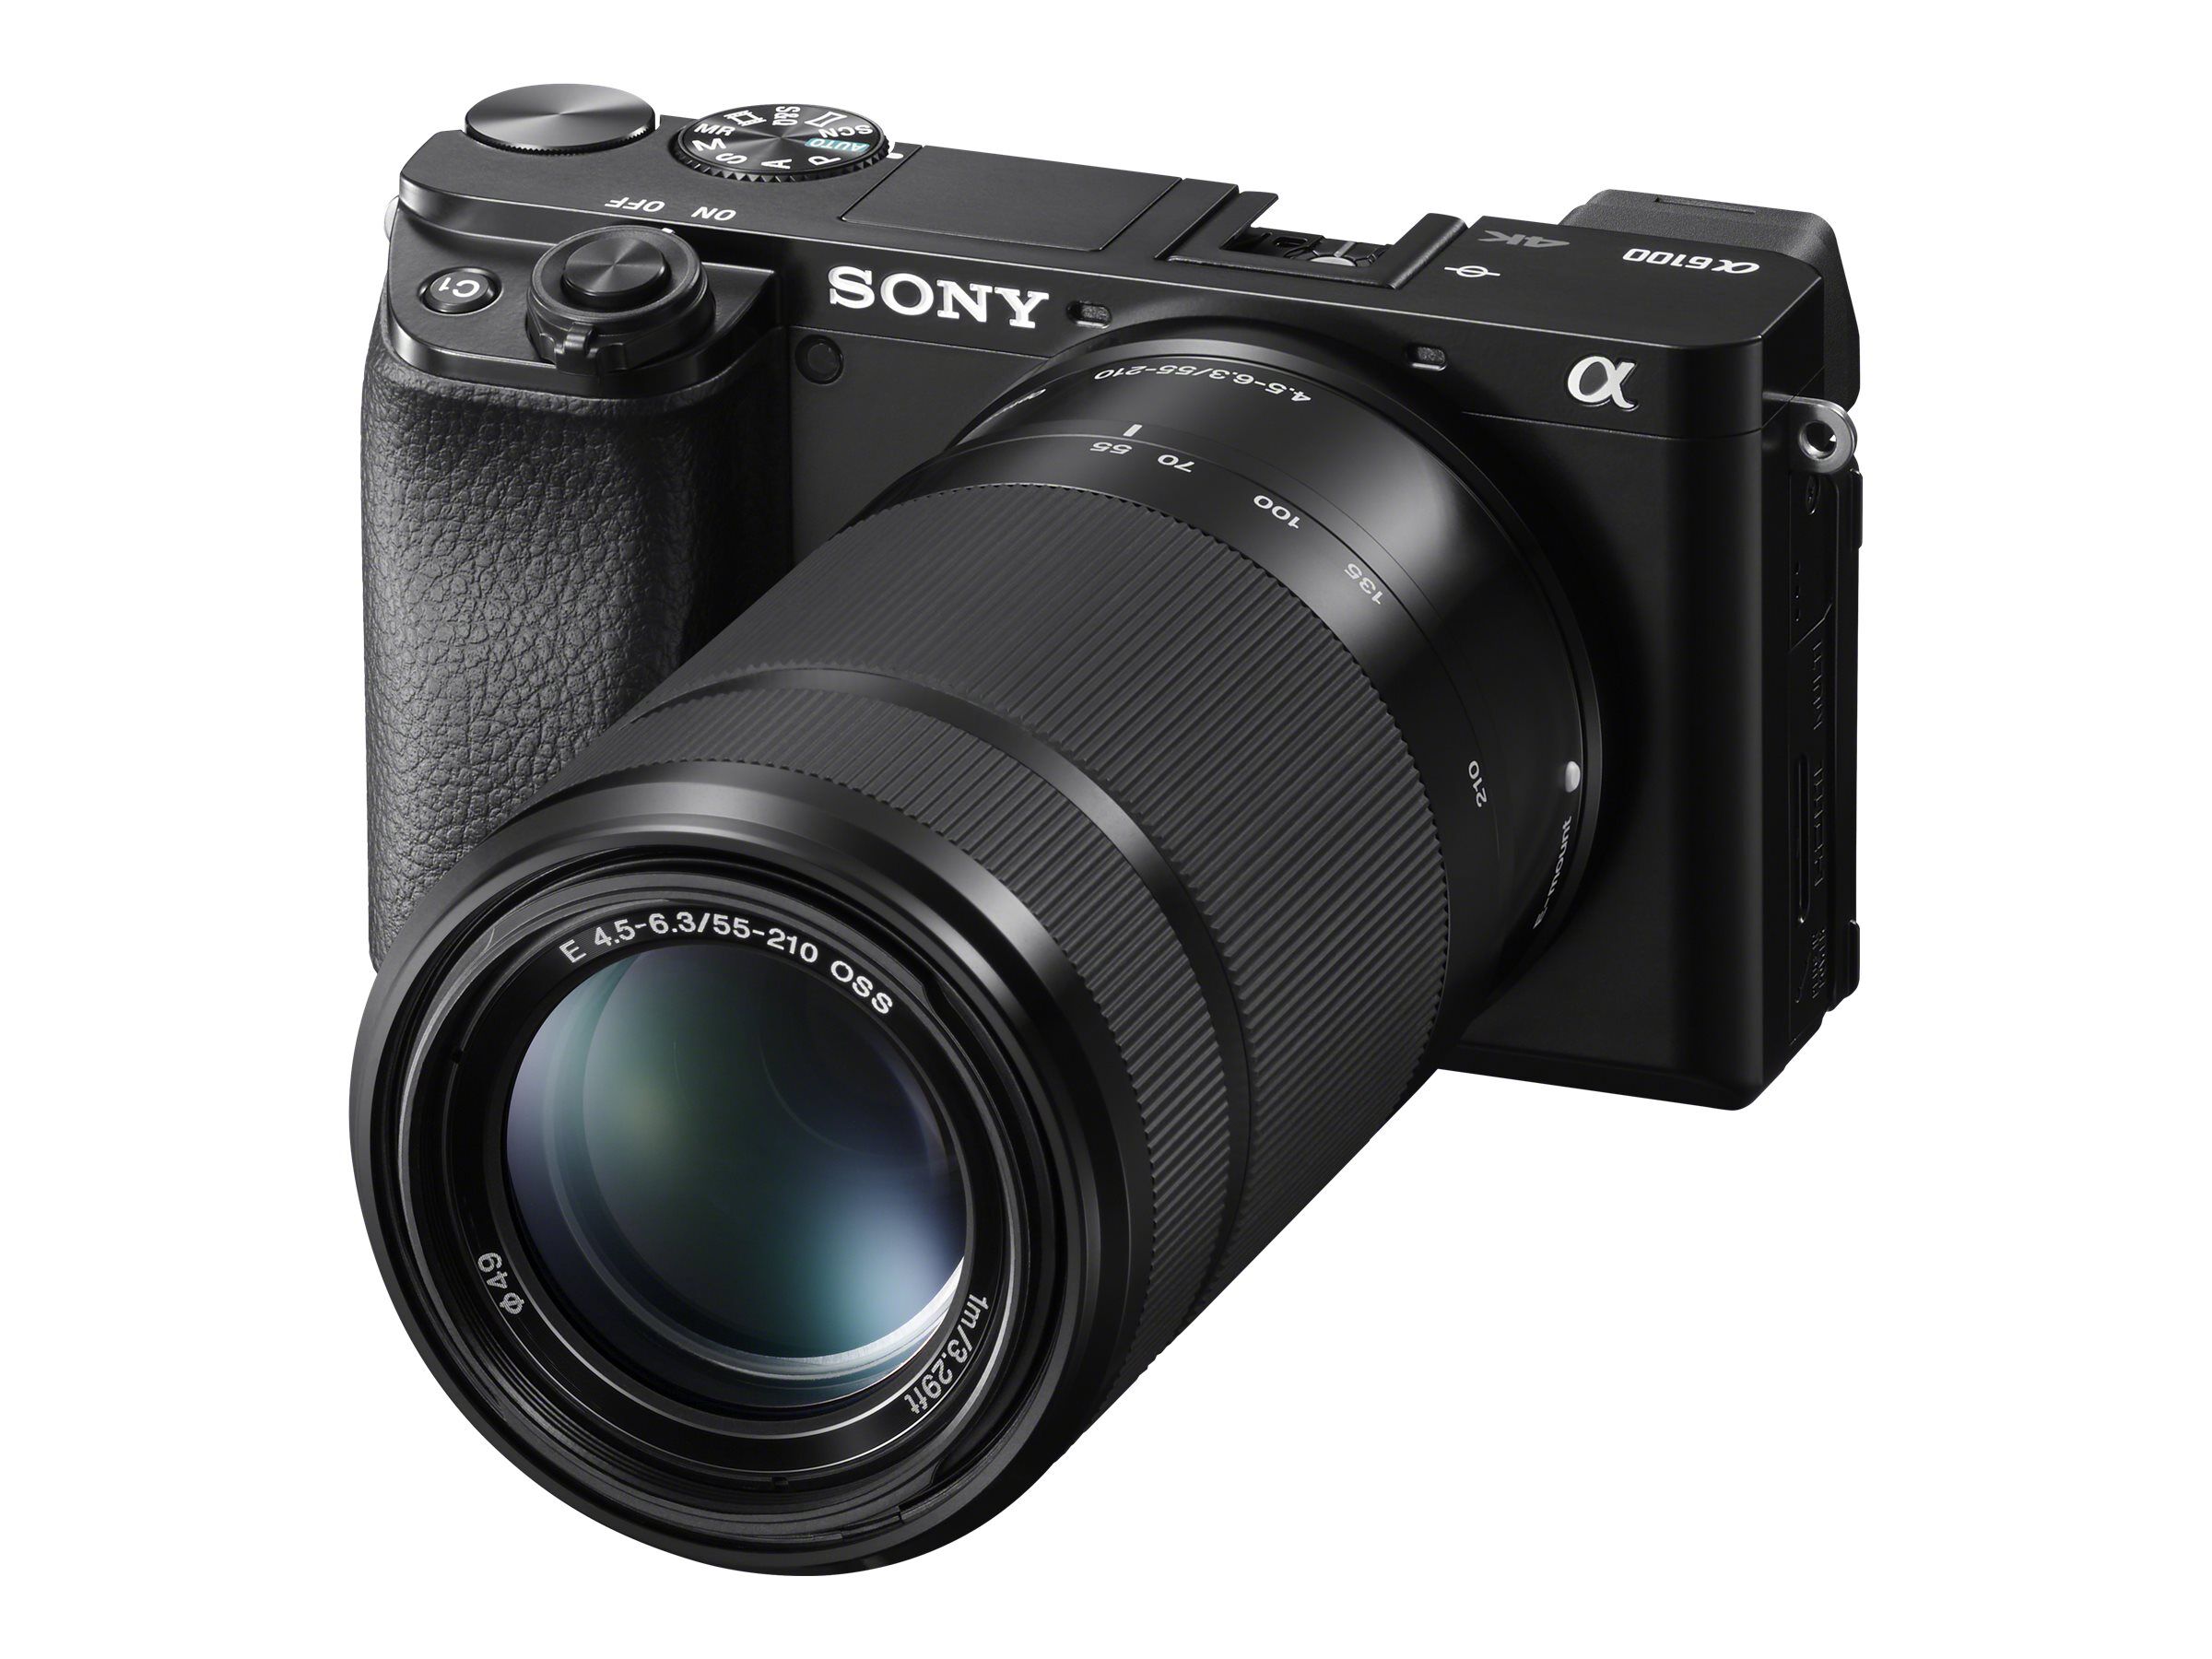 Sony α6100 ILCE-6100Y - digital camera 16-50mm and 55-210mm lenses